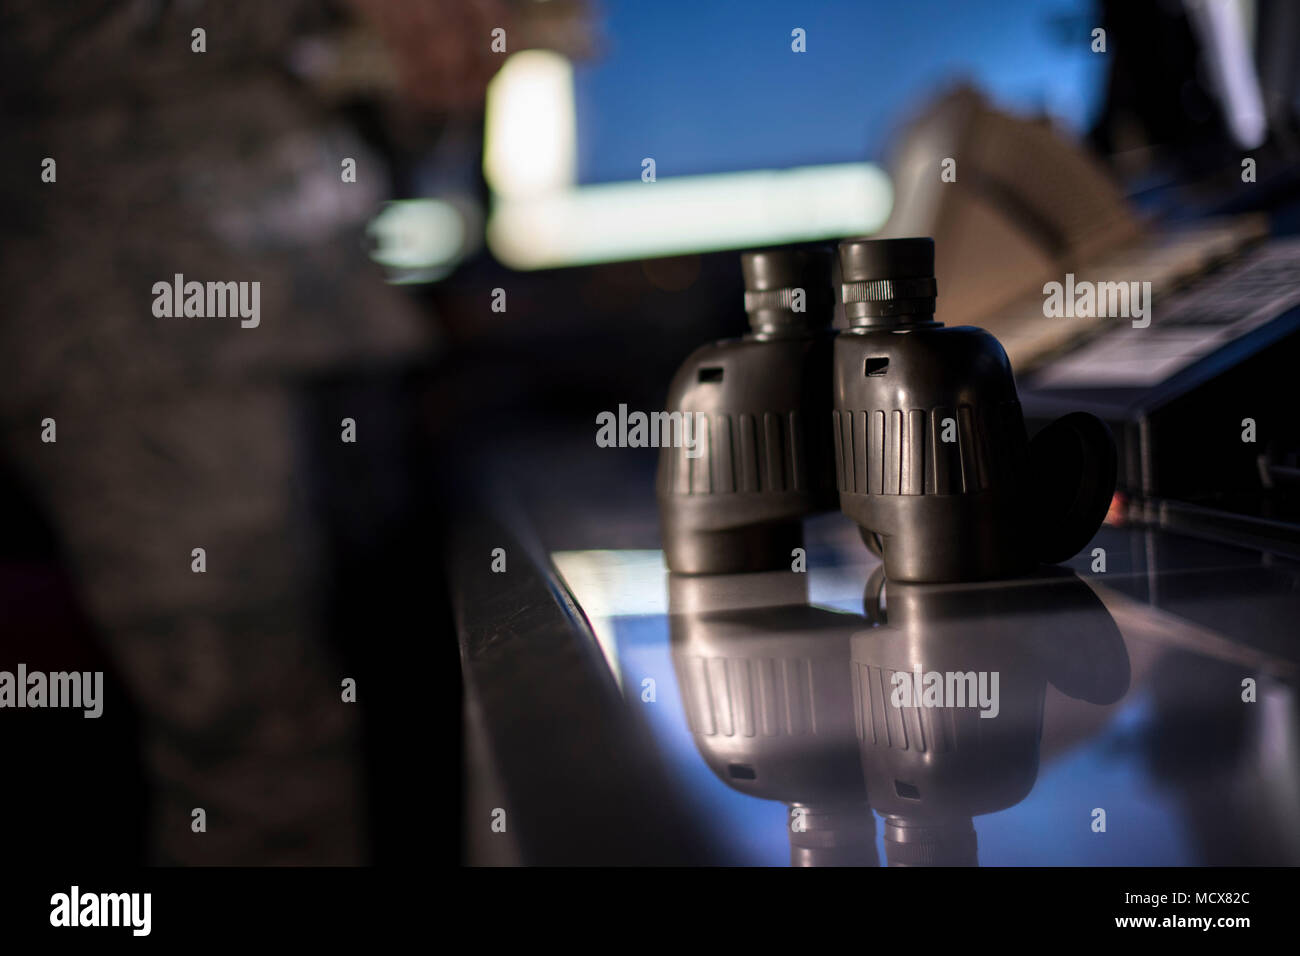 Vance air traffic controllers use many tools to assist them in controlling the airspace, such as binoculars. Binoculars are a tool that allow them to see greater distances. (U.S. Air Force photo by Airman Zachary Heal) Stock Photo